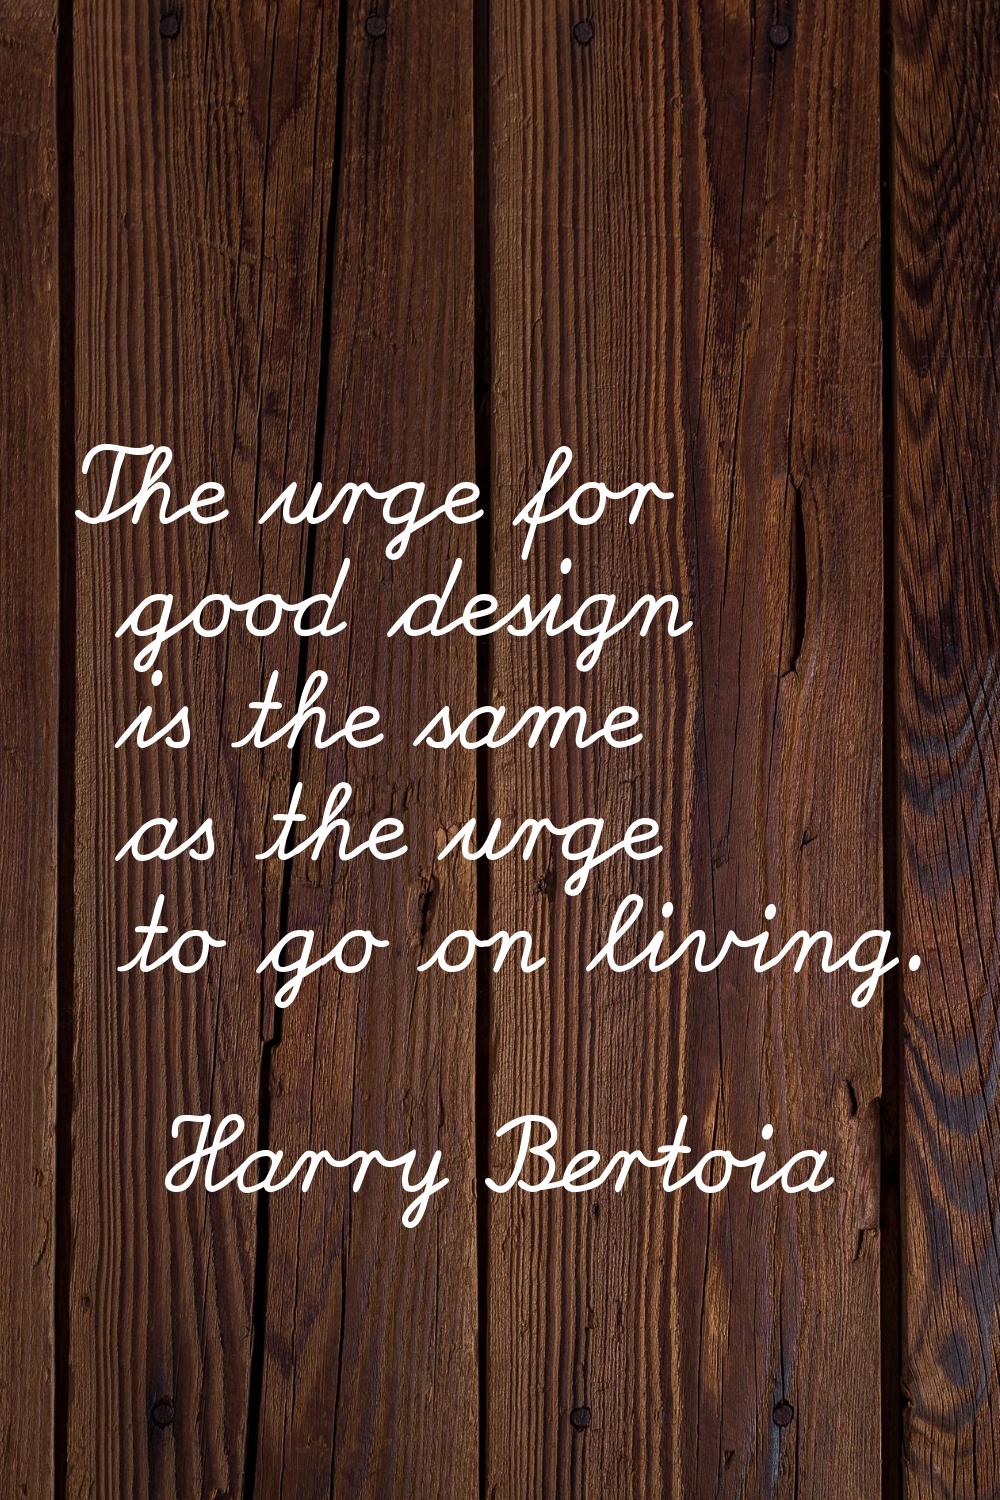 The urge for good design is the same as the urge to go on living.